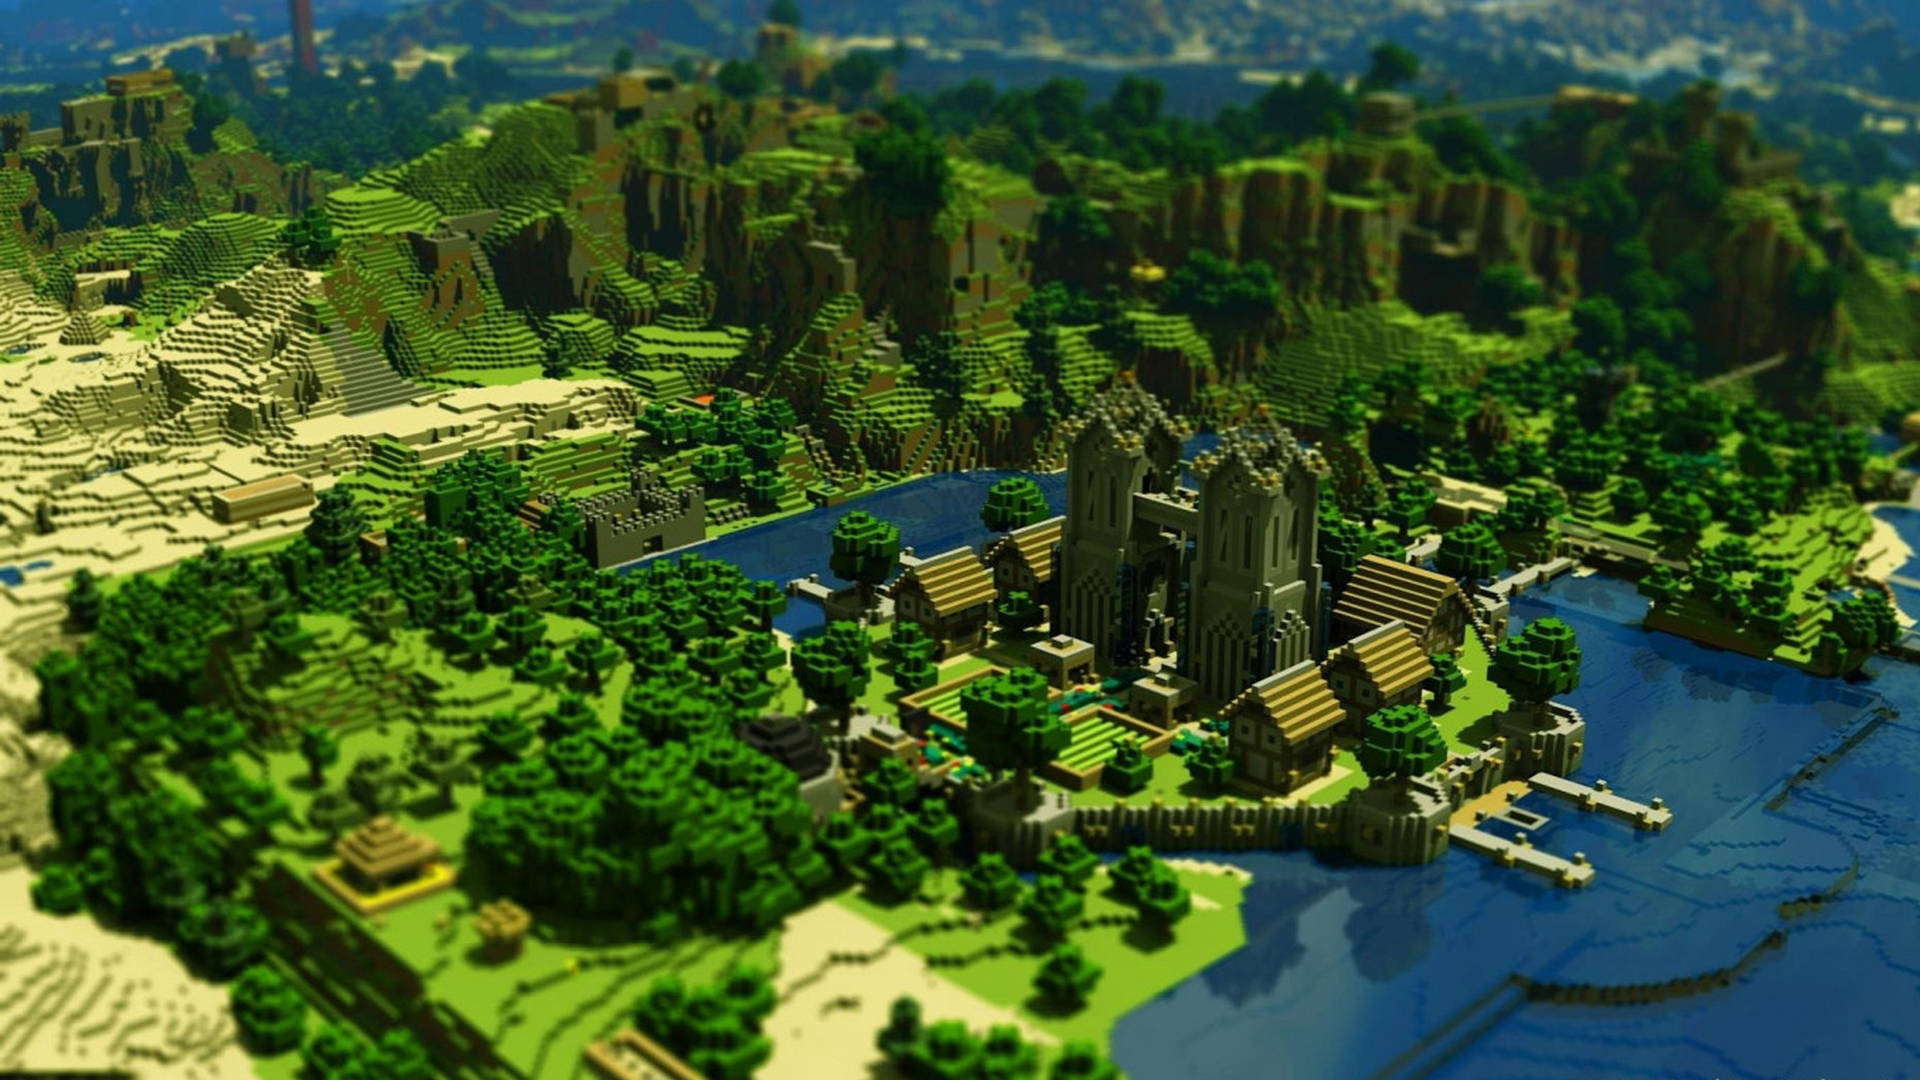 Town Surrounded By Woods 2560x1440 Minecraft Background